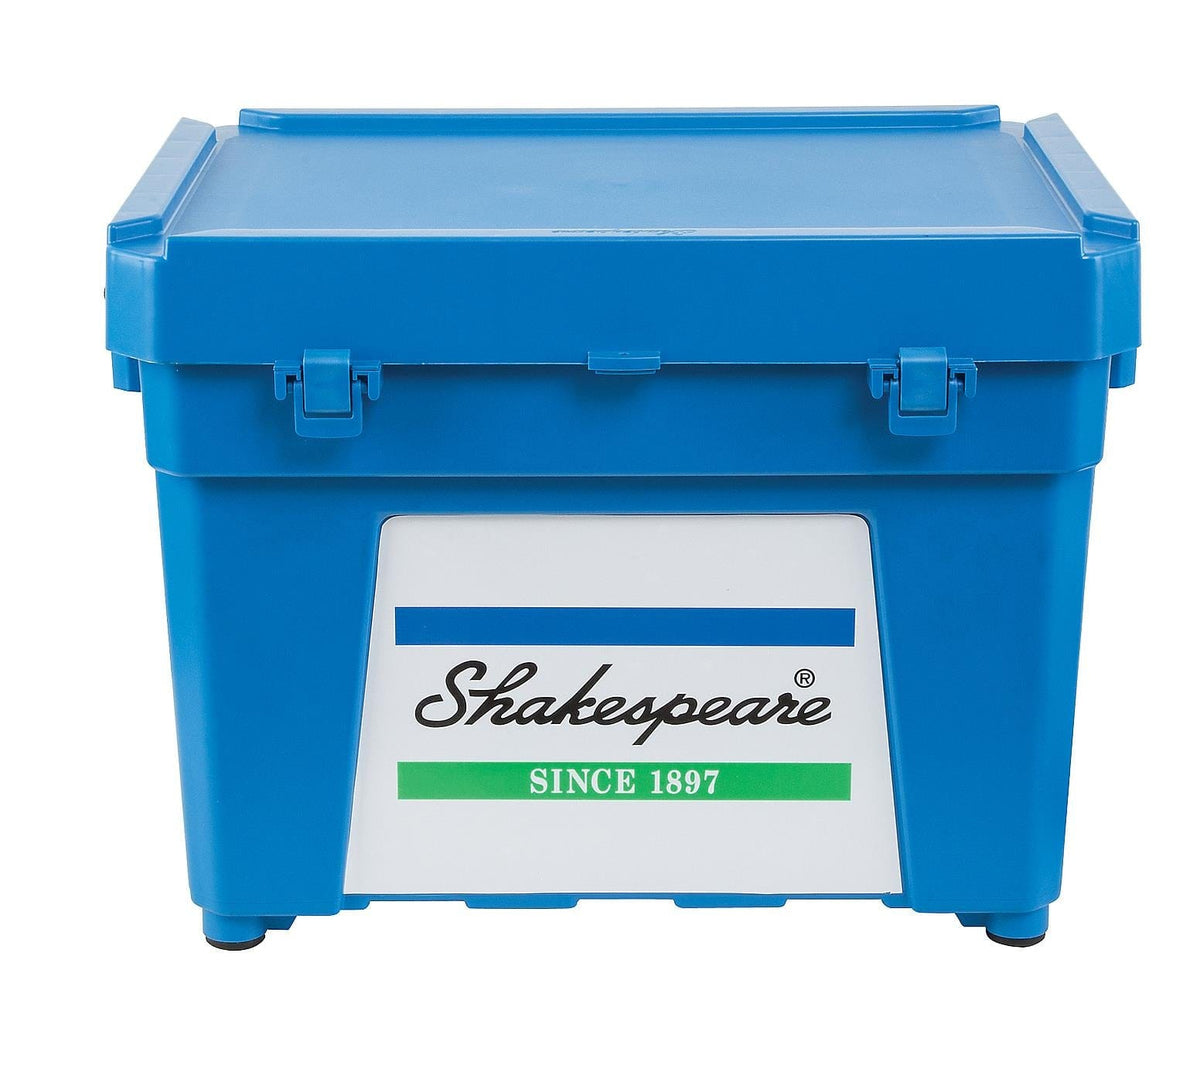 Shakespeare Seat Box - Blue (with carry shoulder strap)